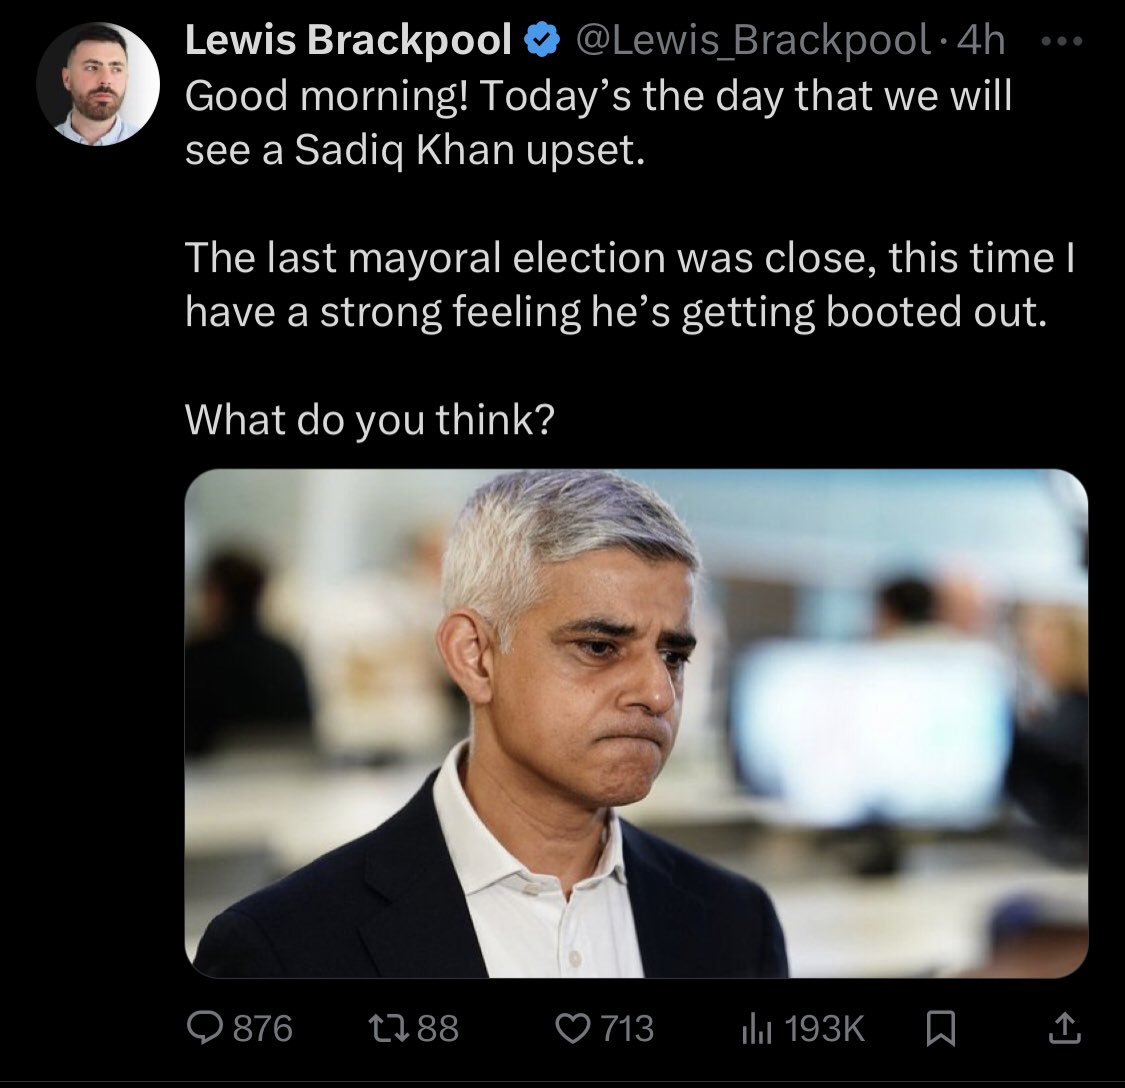 This didn't age well @Lewis_Brackpool 😂😂😂 #LondonMayoralElection